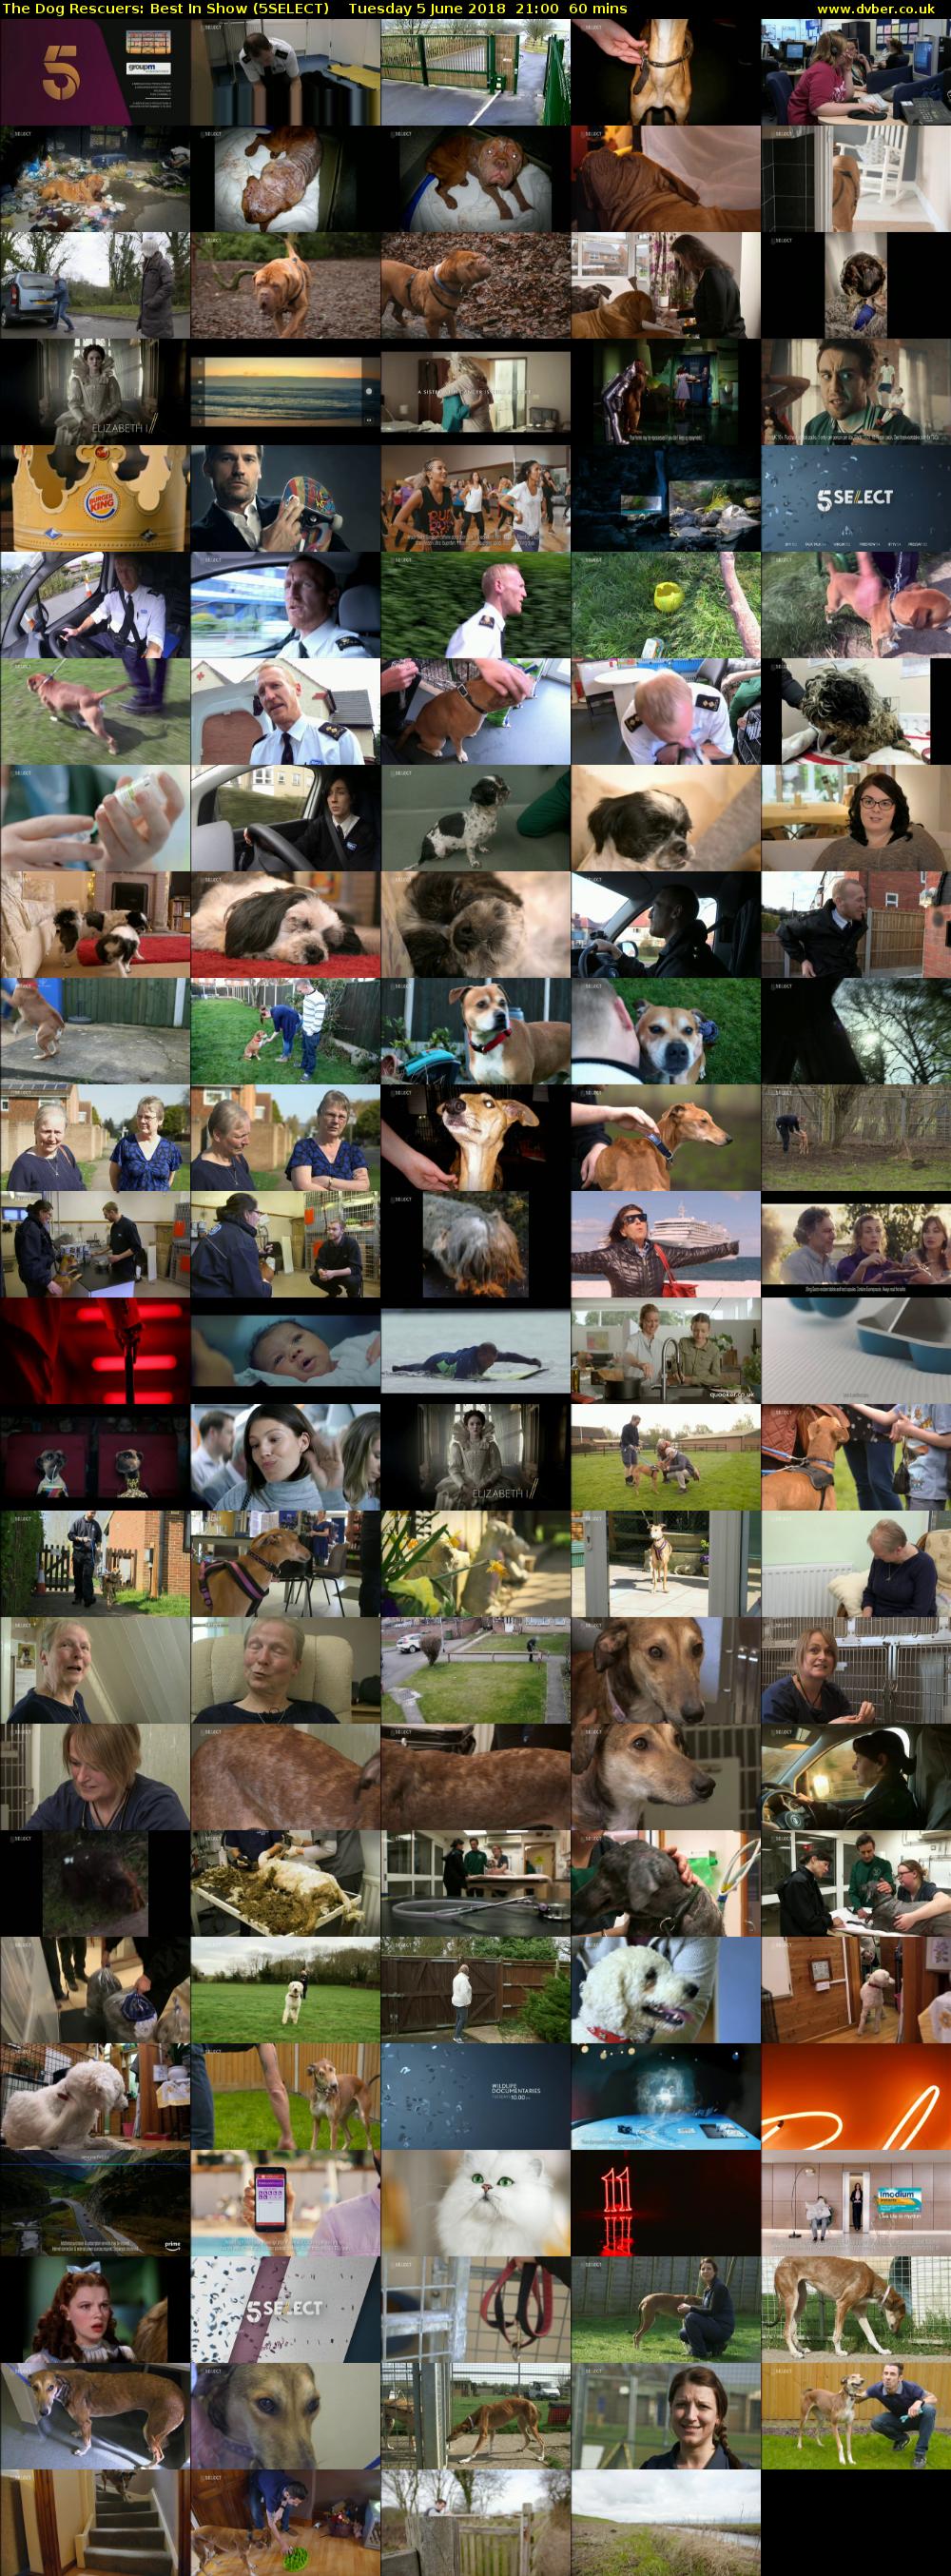 The Dog Rescuers: Best In Show (5SELECT) Tuesday 5 June 2018 21:00 - 22:00